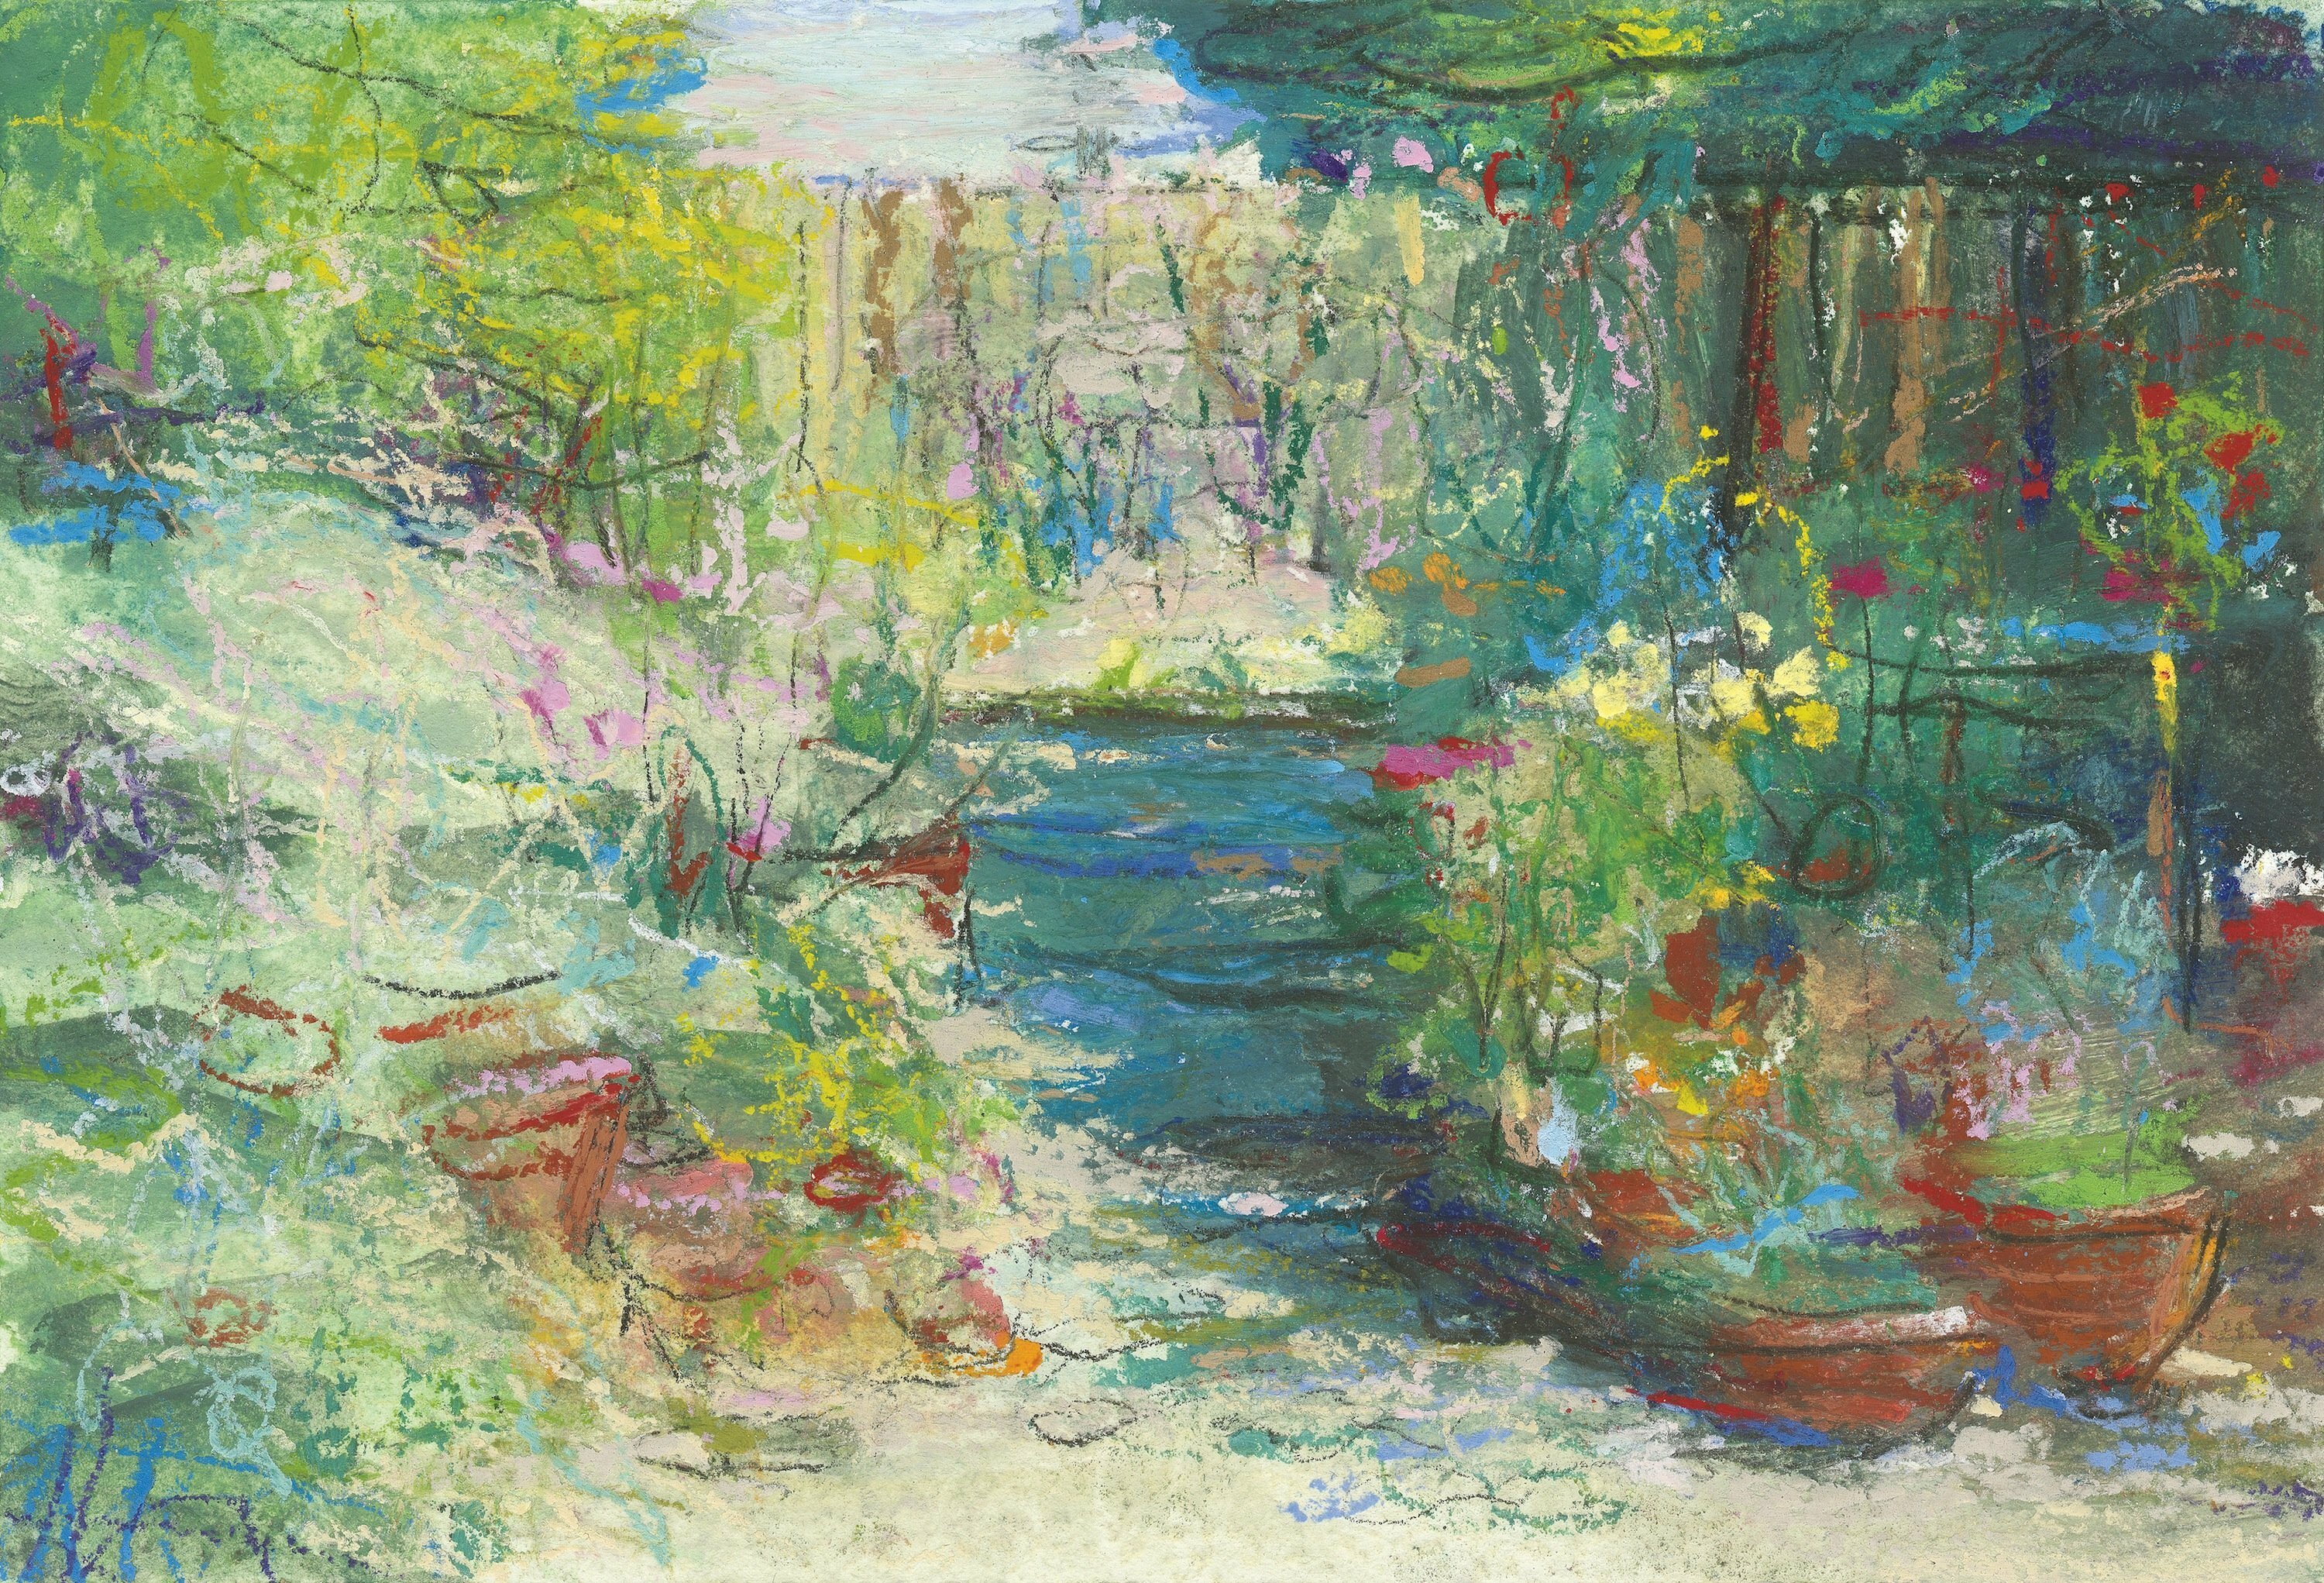 Steven Gordon; My Napa Garden, 2002, Original Giclee Reproduction, 21 x 14 inches. Artwork description: 241 Limited Edition Print from an original Pastel Painting This view of my garden at our home in Napa Valley is done with a more impressionistic and relatively new technique combining oil and soft pastel which creates a spontaneous feel and allows for a more vibrant approach to ...